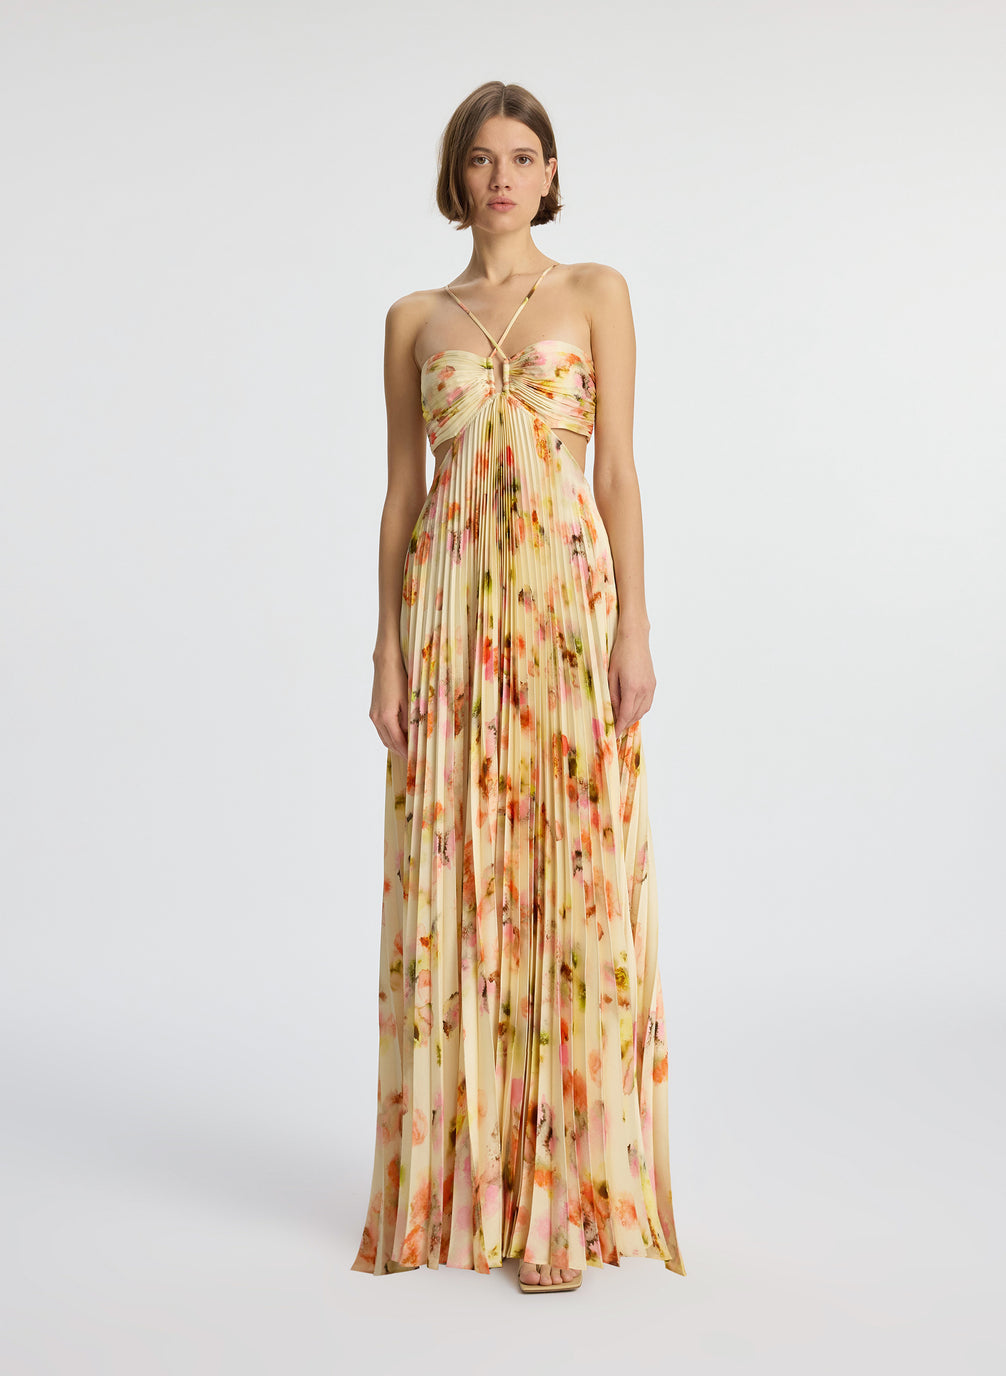 front view of woman wearing yellow pleated maxi dress